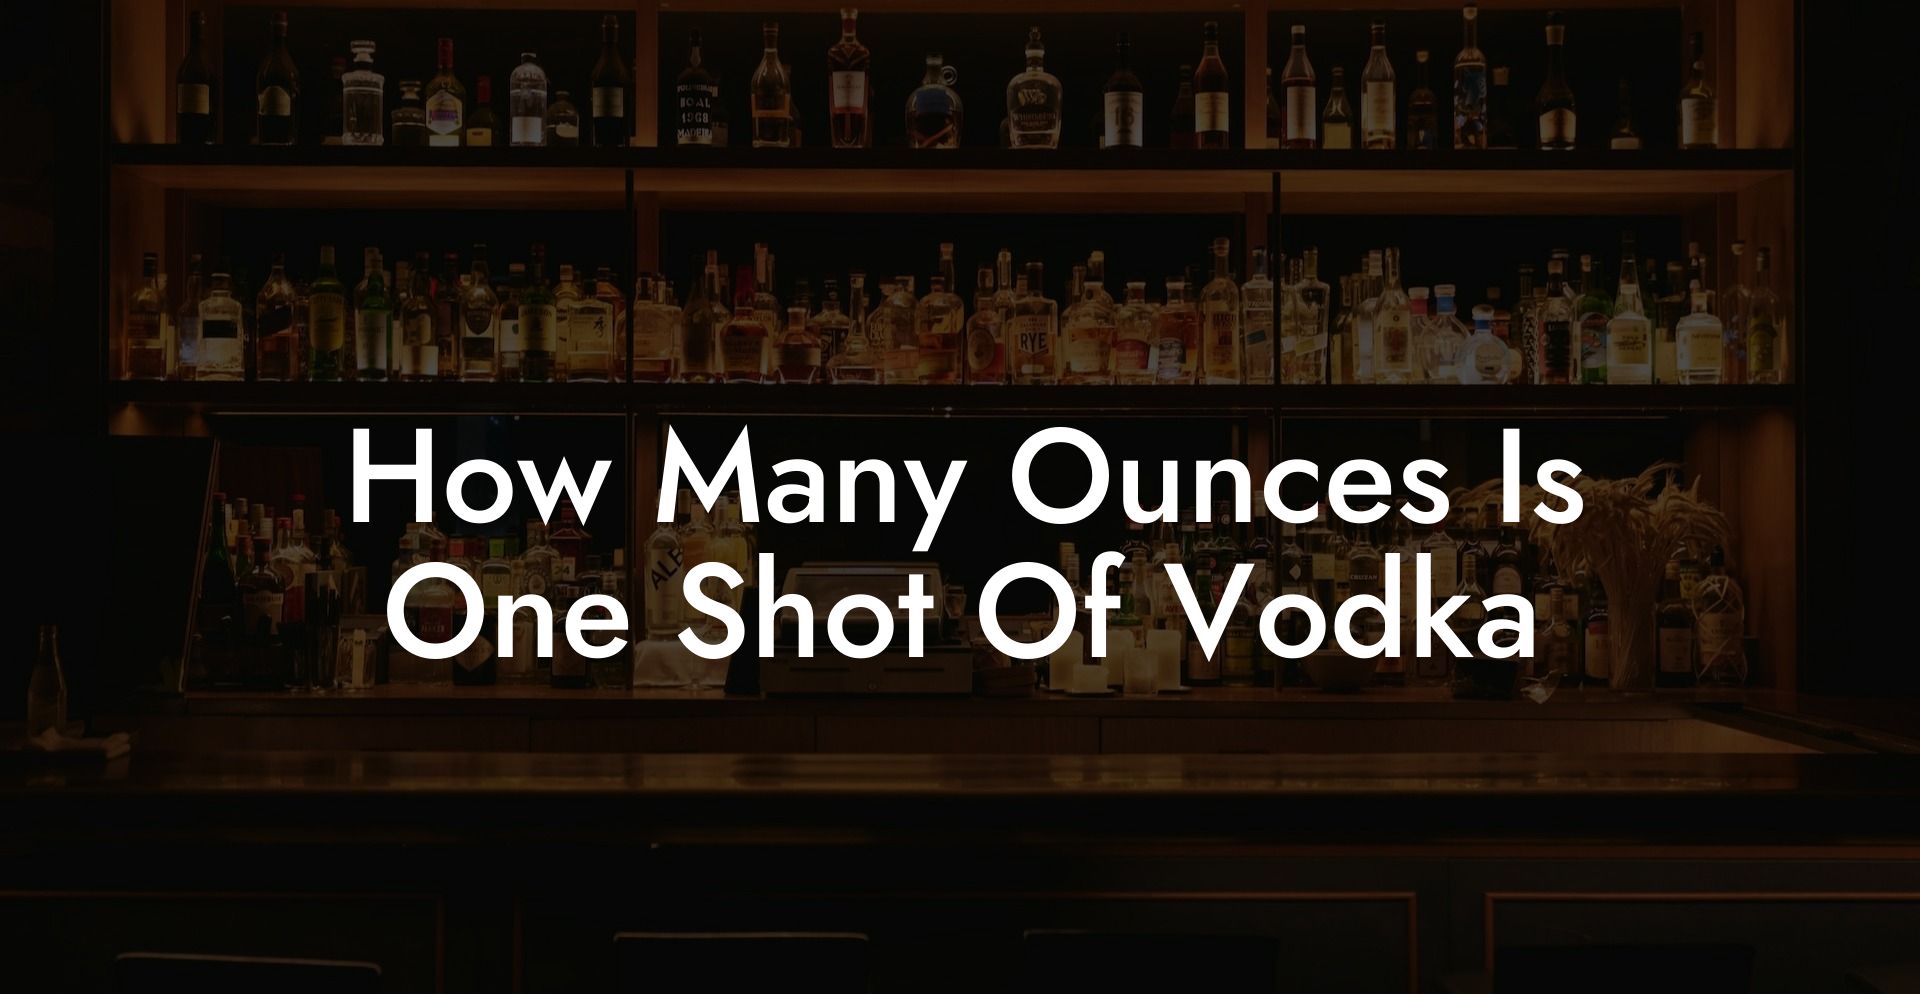 How Many Ounces Is One Shot Of Vodka